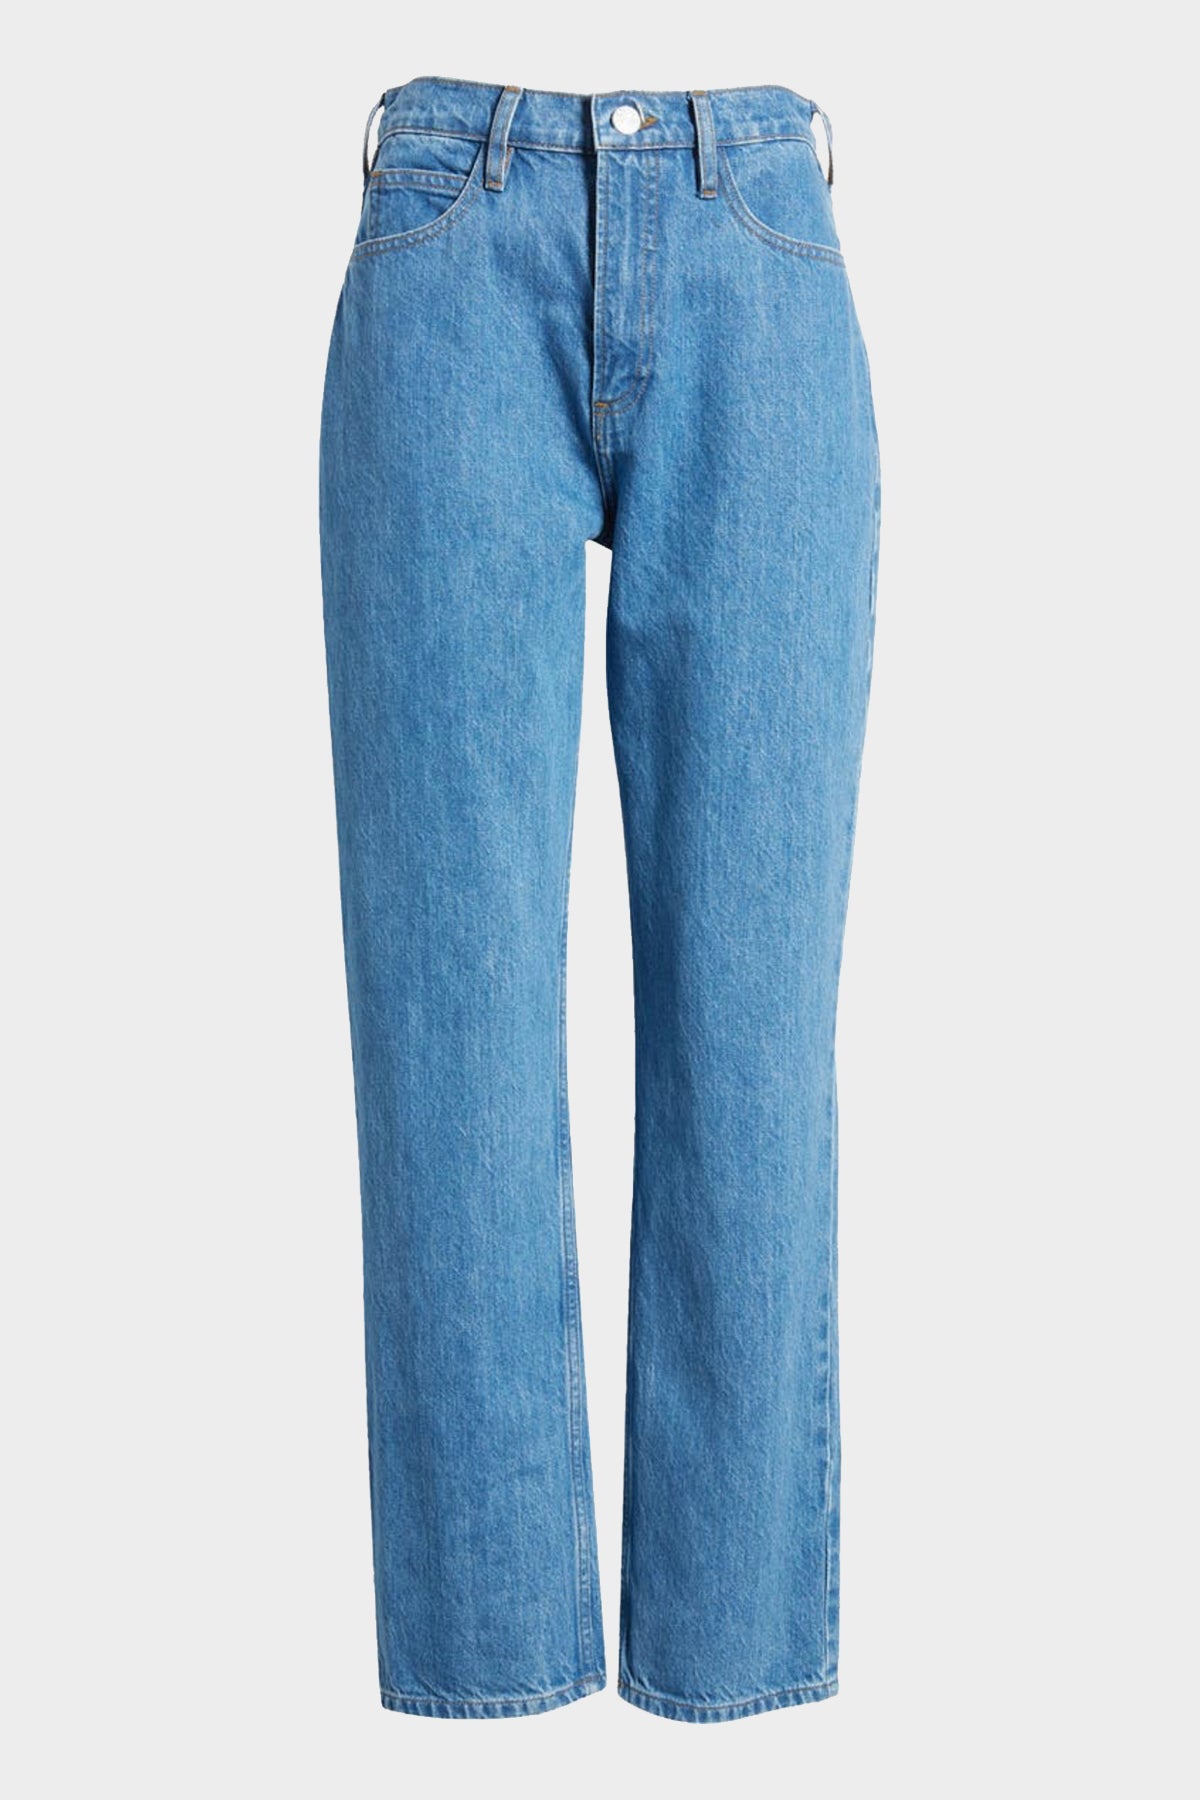 Le High N Tight Straight Jean in Meadow - shop-olivia.com